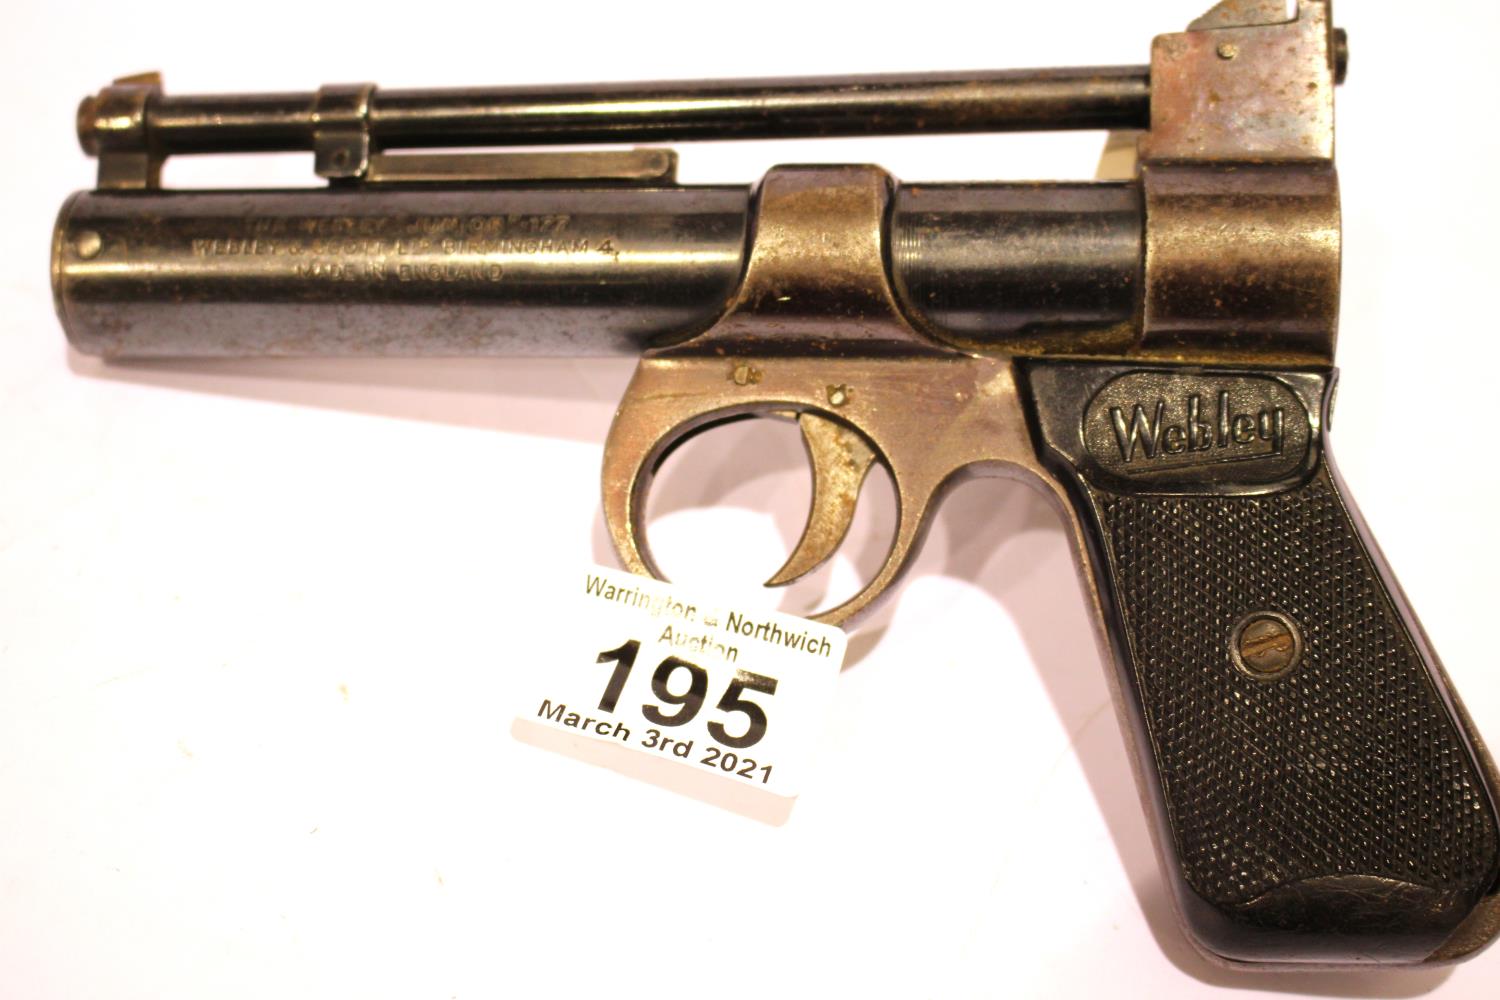 Webley Junior 177 air pistol by Webley and Scott Ltd. P&P Group 2 (£18+VAT for the first lot and £